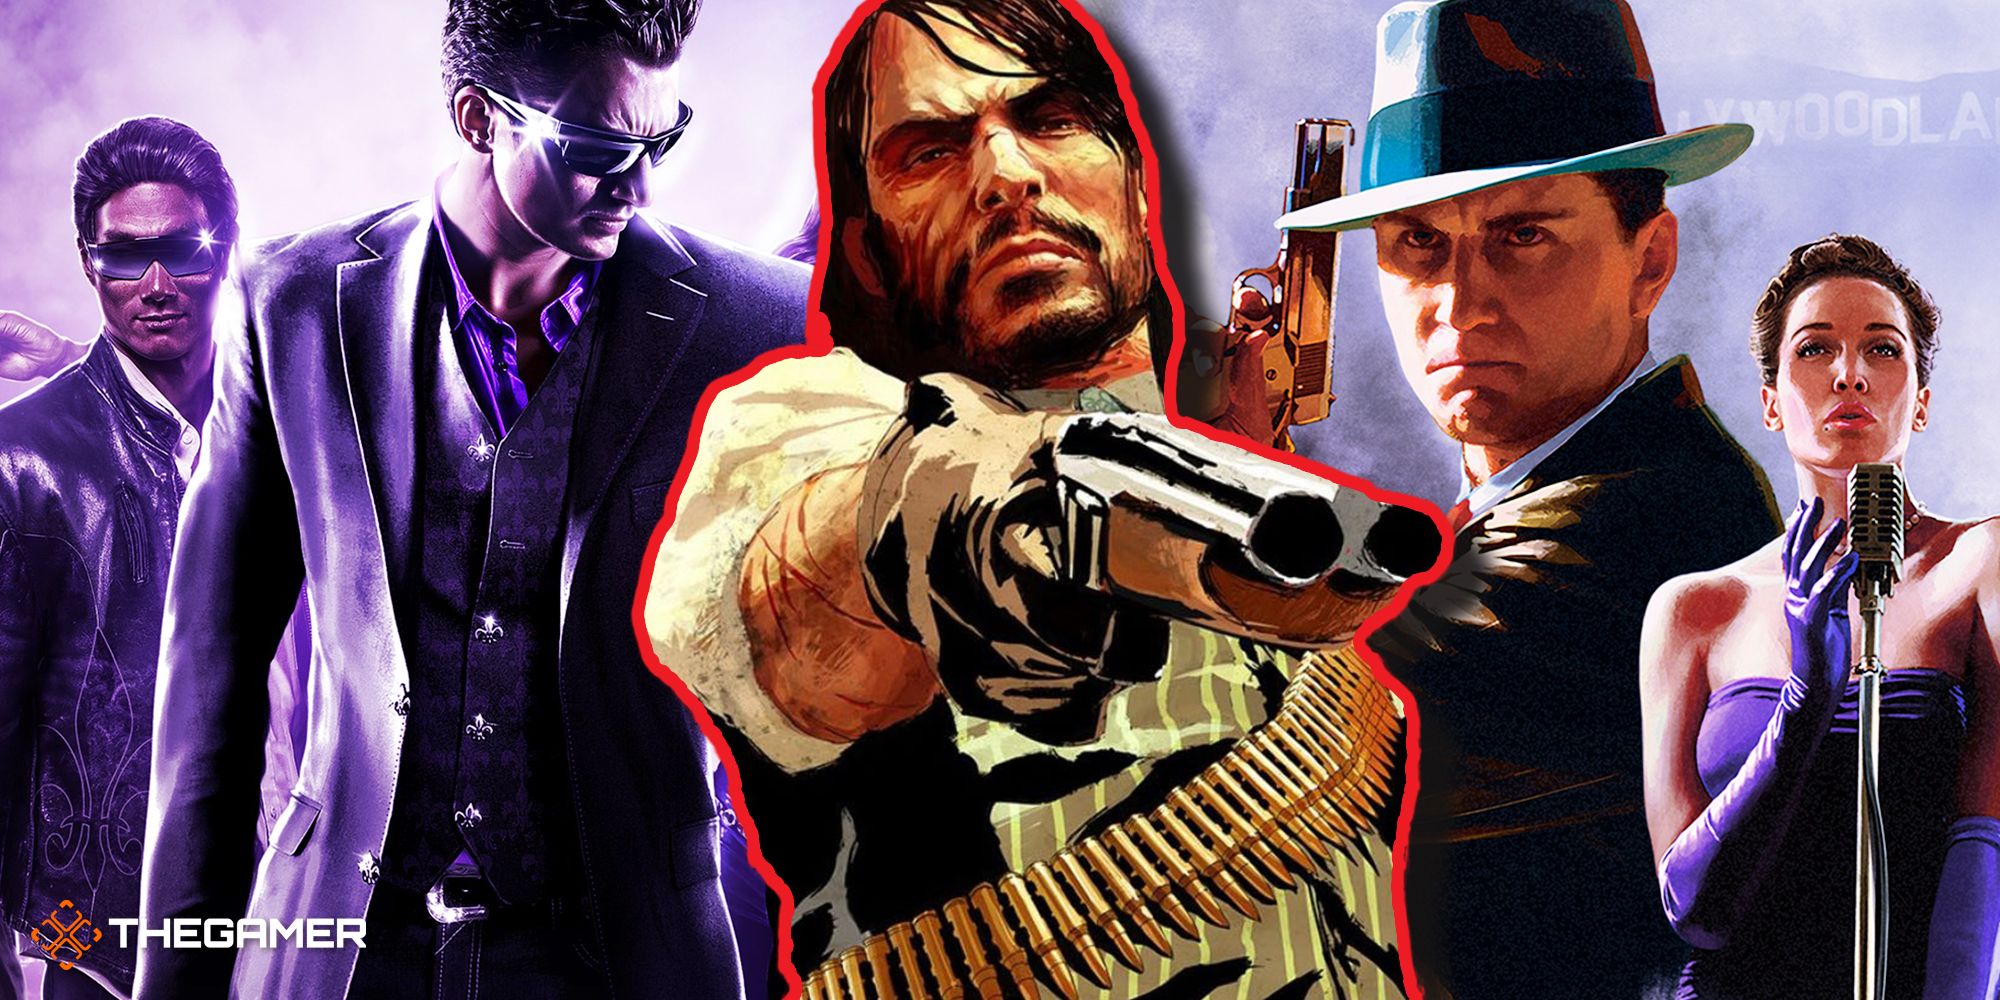 Game art from L.A. Noire, Red Dead Redemption and Saints Row The Third.